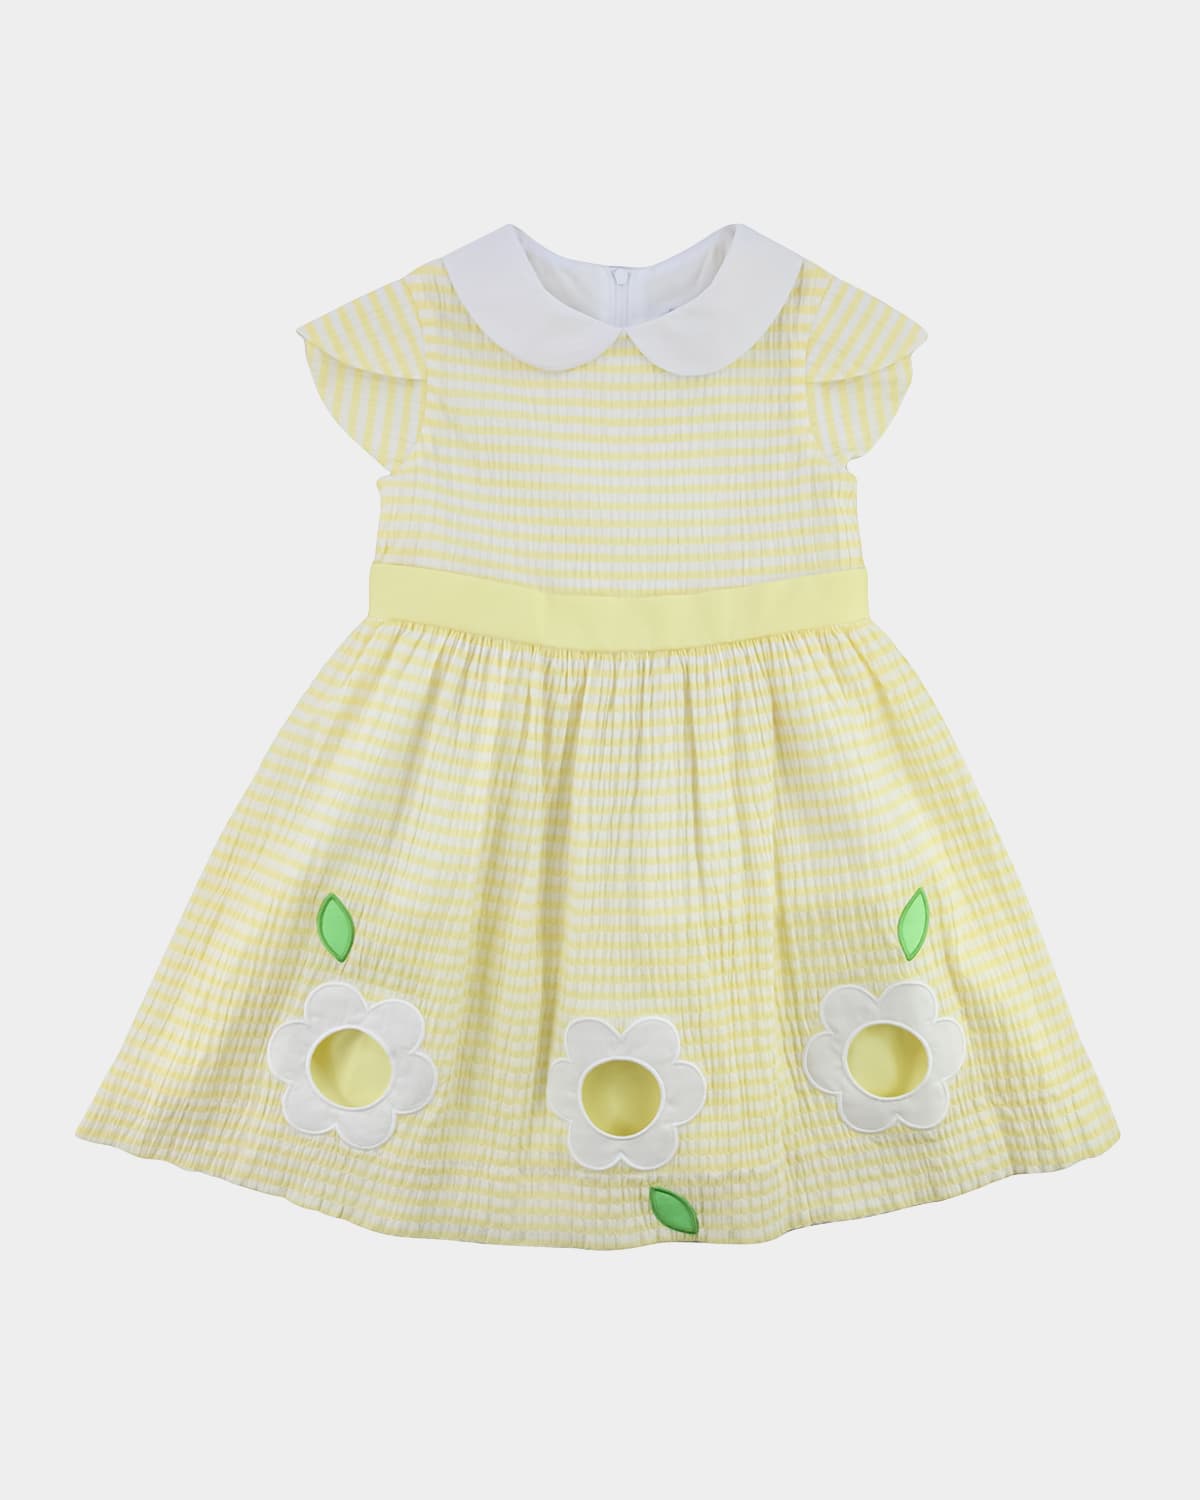 Florence Eiseman Kids' Girl's Seersucker Dress With Cutout Embroidered Flowers In Yellow/wht